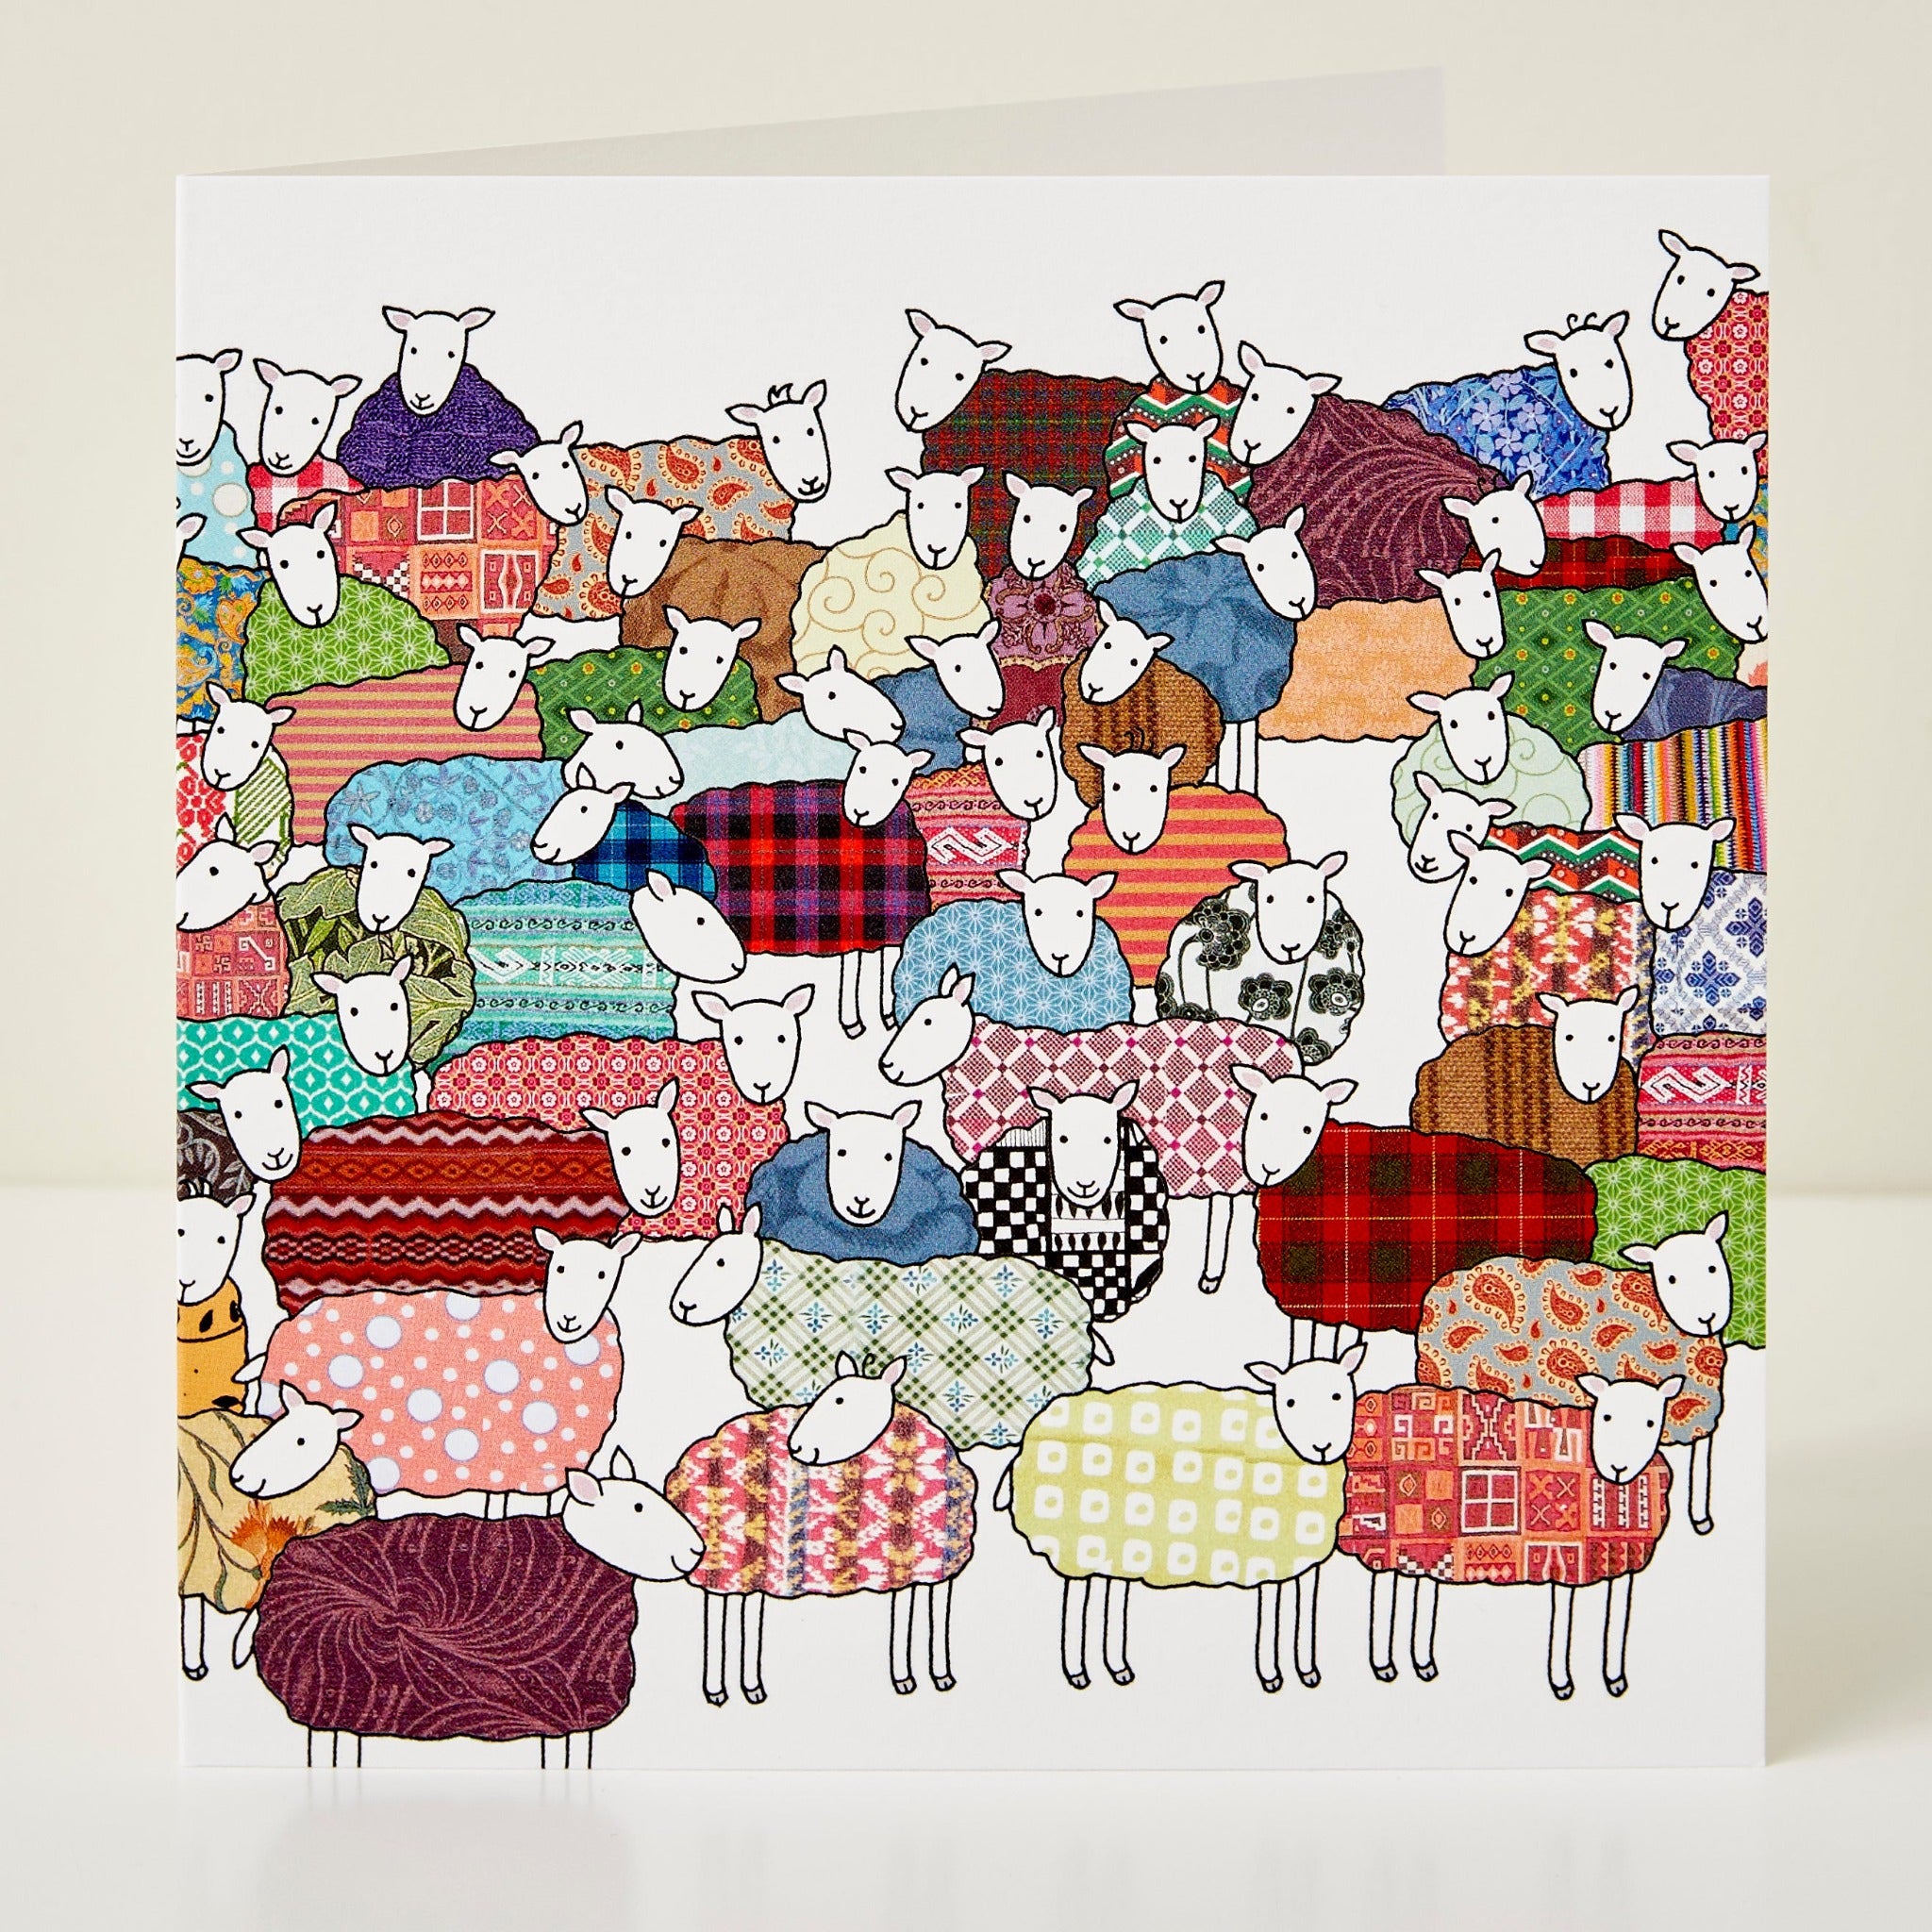 Flock of Colourful Sheep Greeting Card by Mary Kilvert